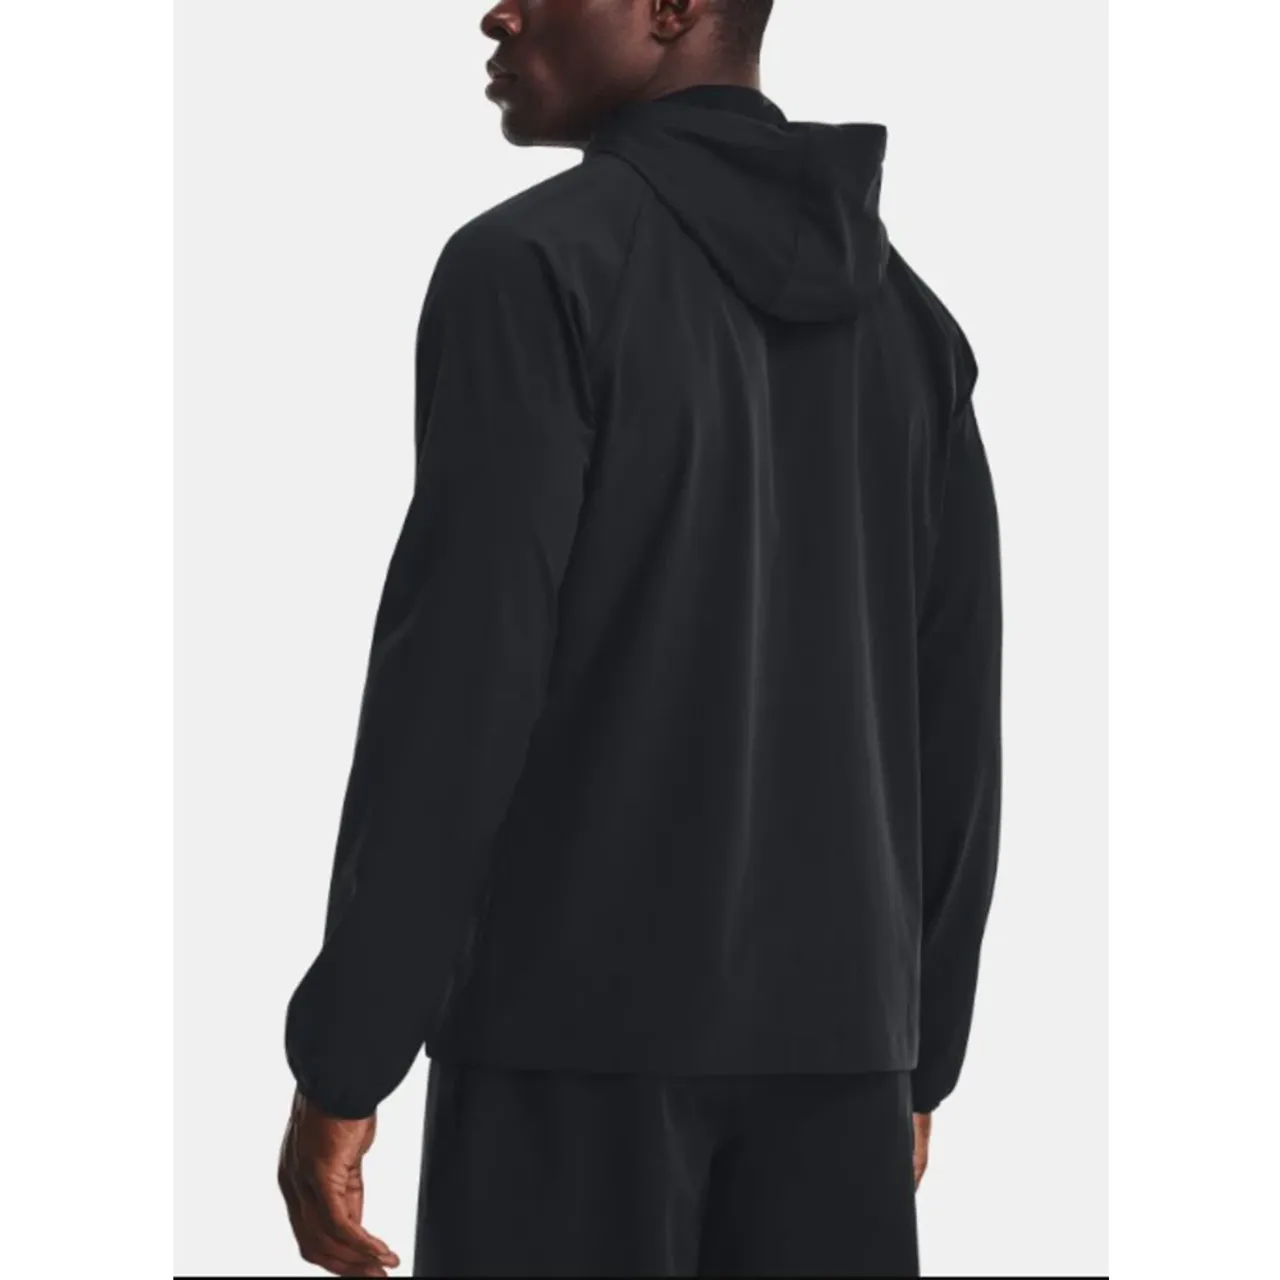 Under Armour , Wind Jackets ,Black male, Sizes: